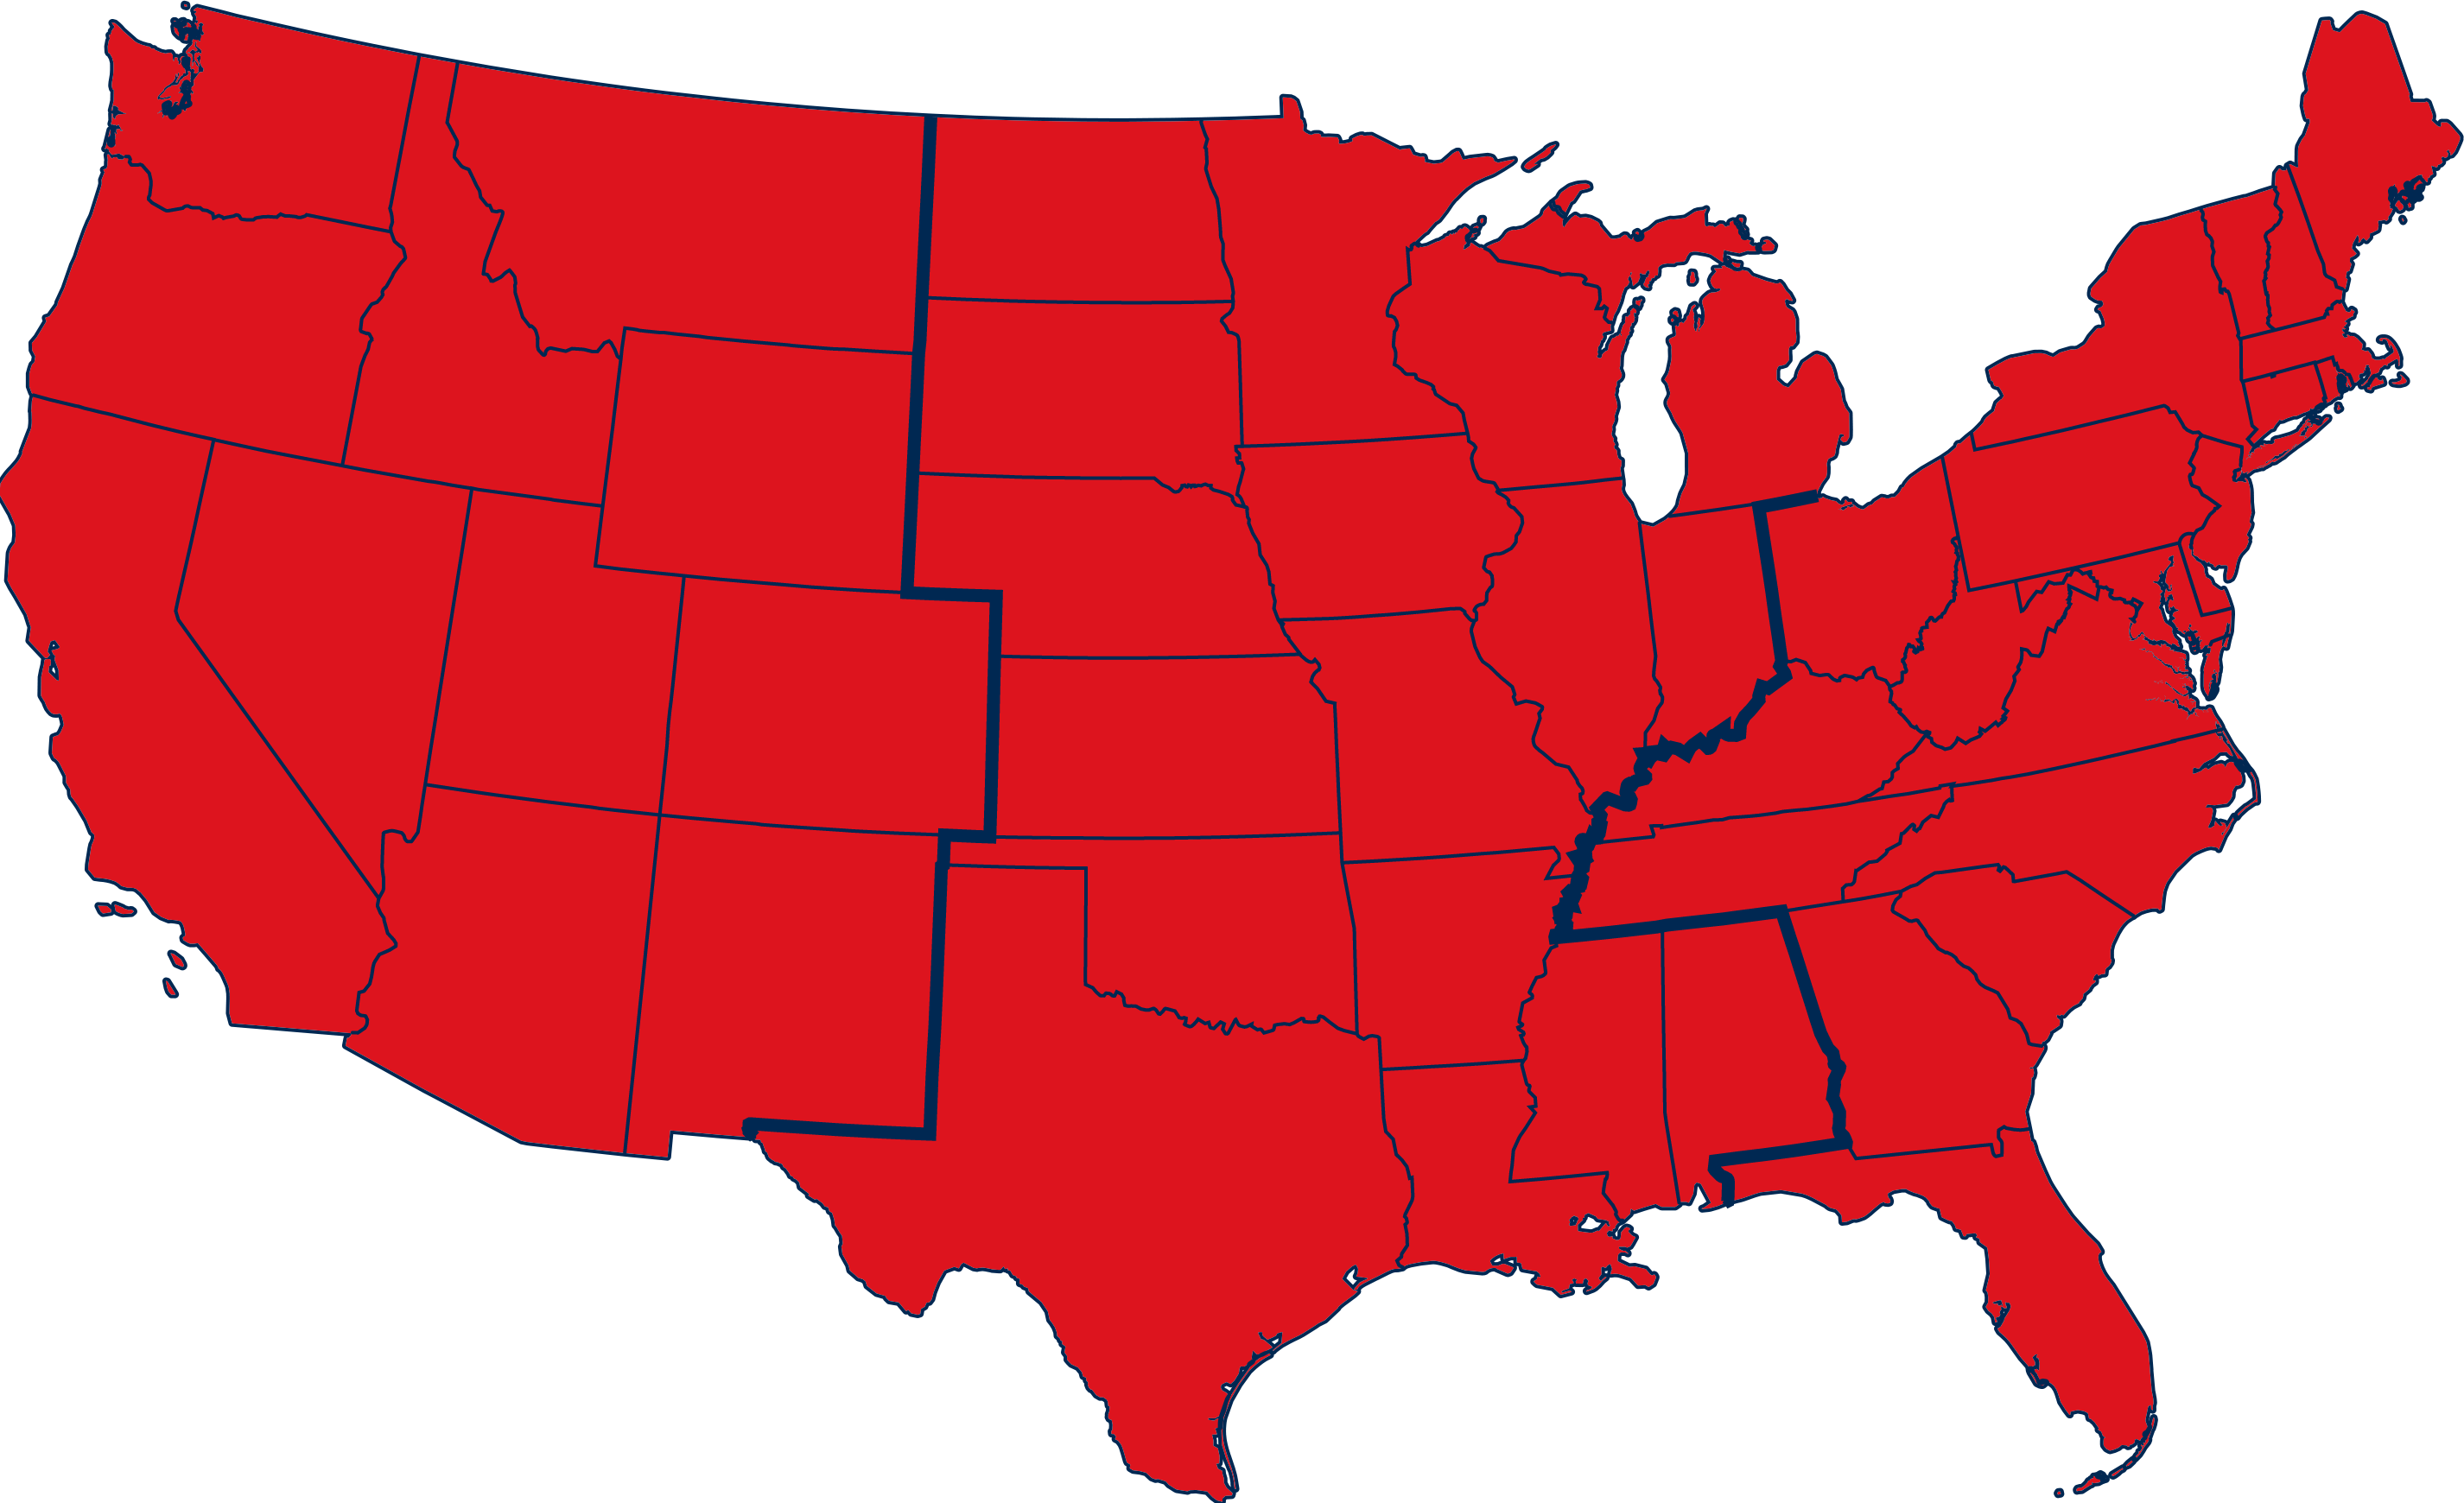 Service Map of USA - eastern, central and western regions